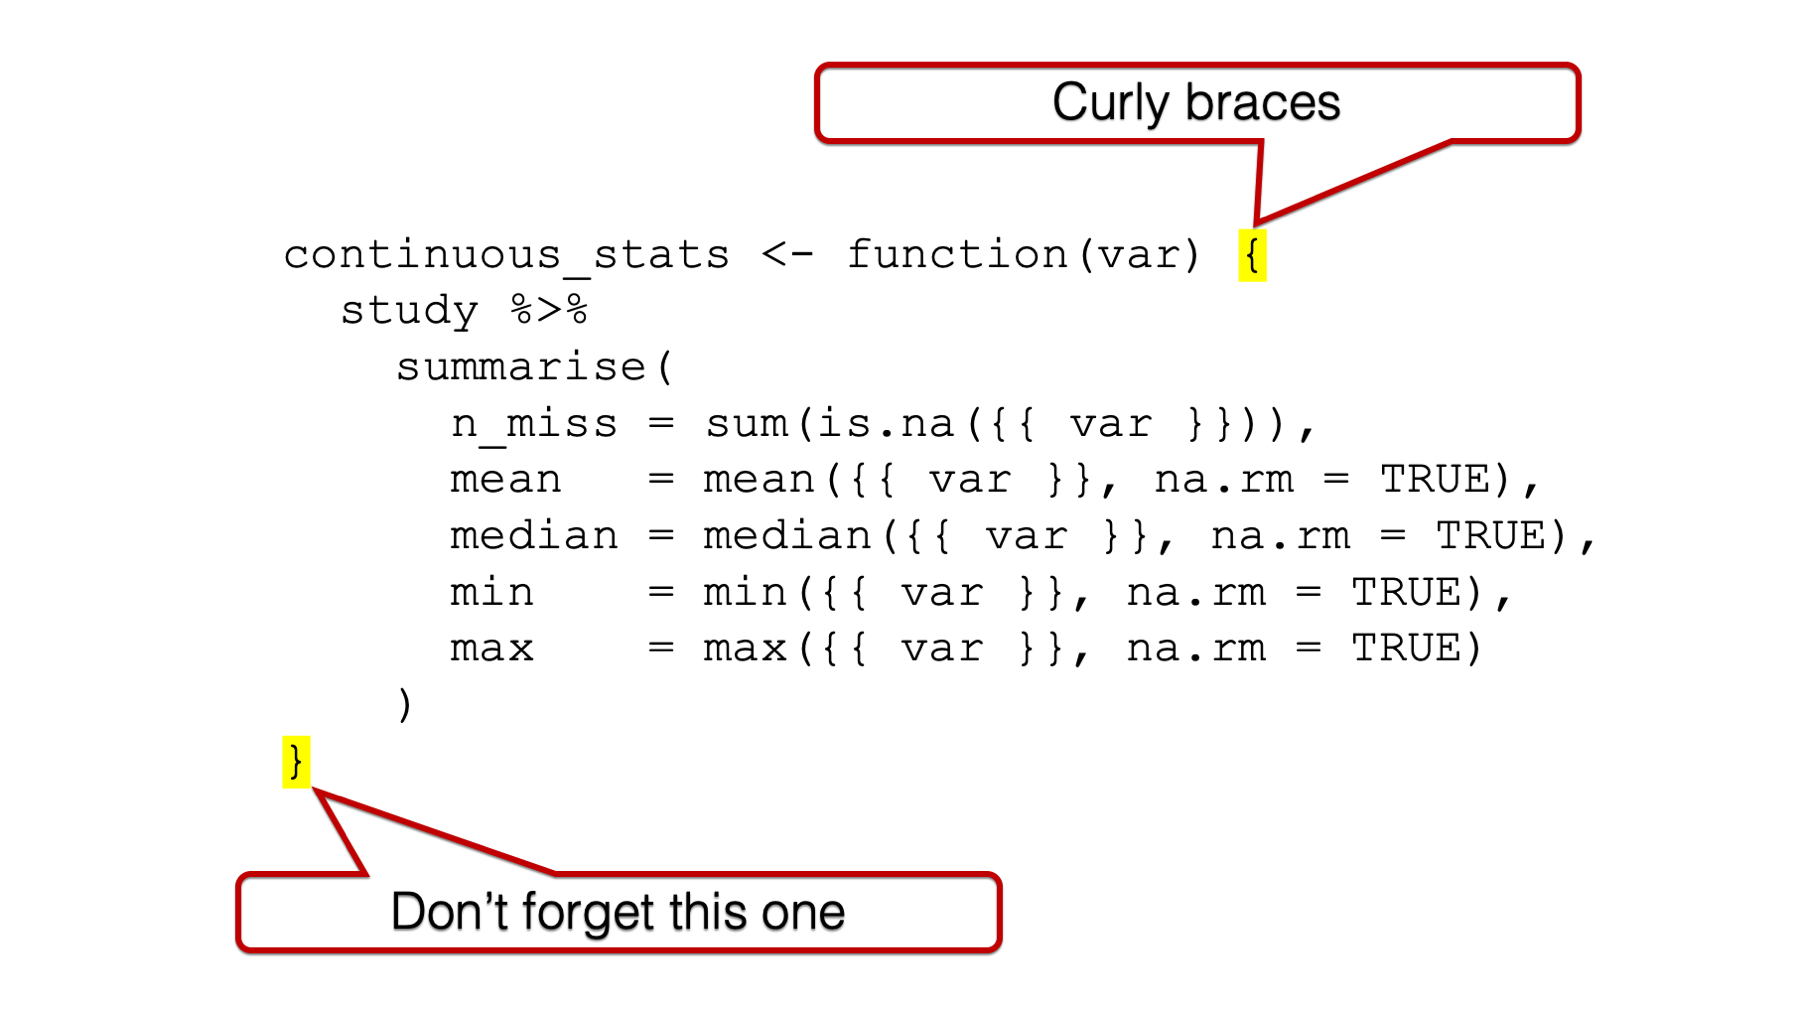 Curly braces around the function body.